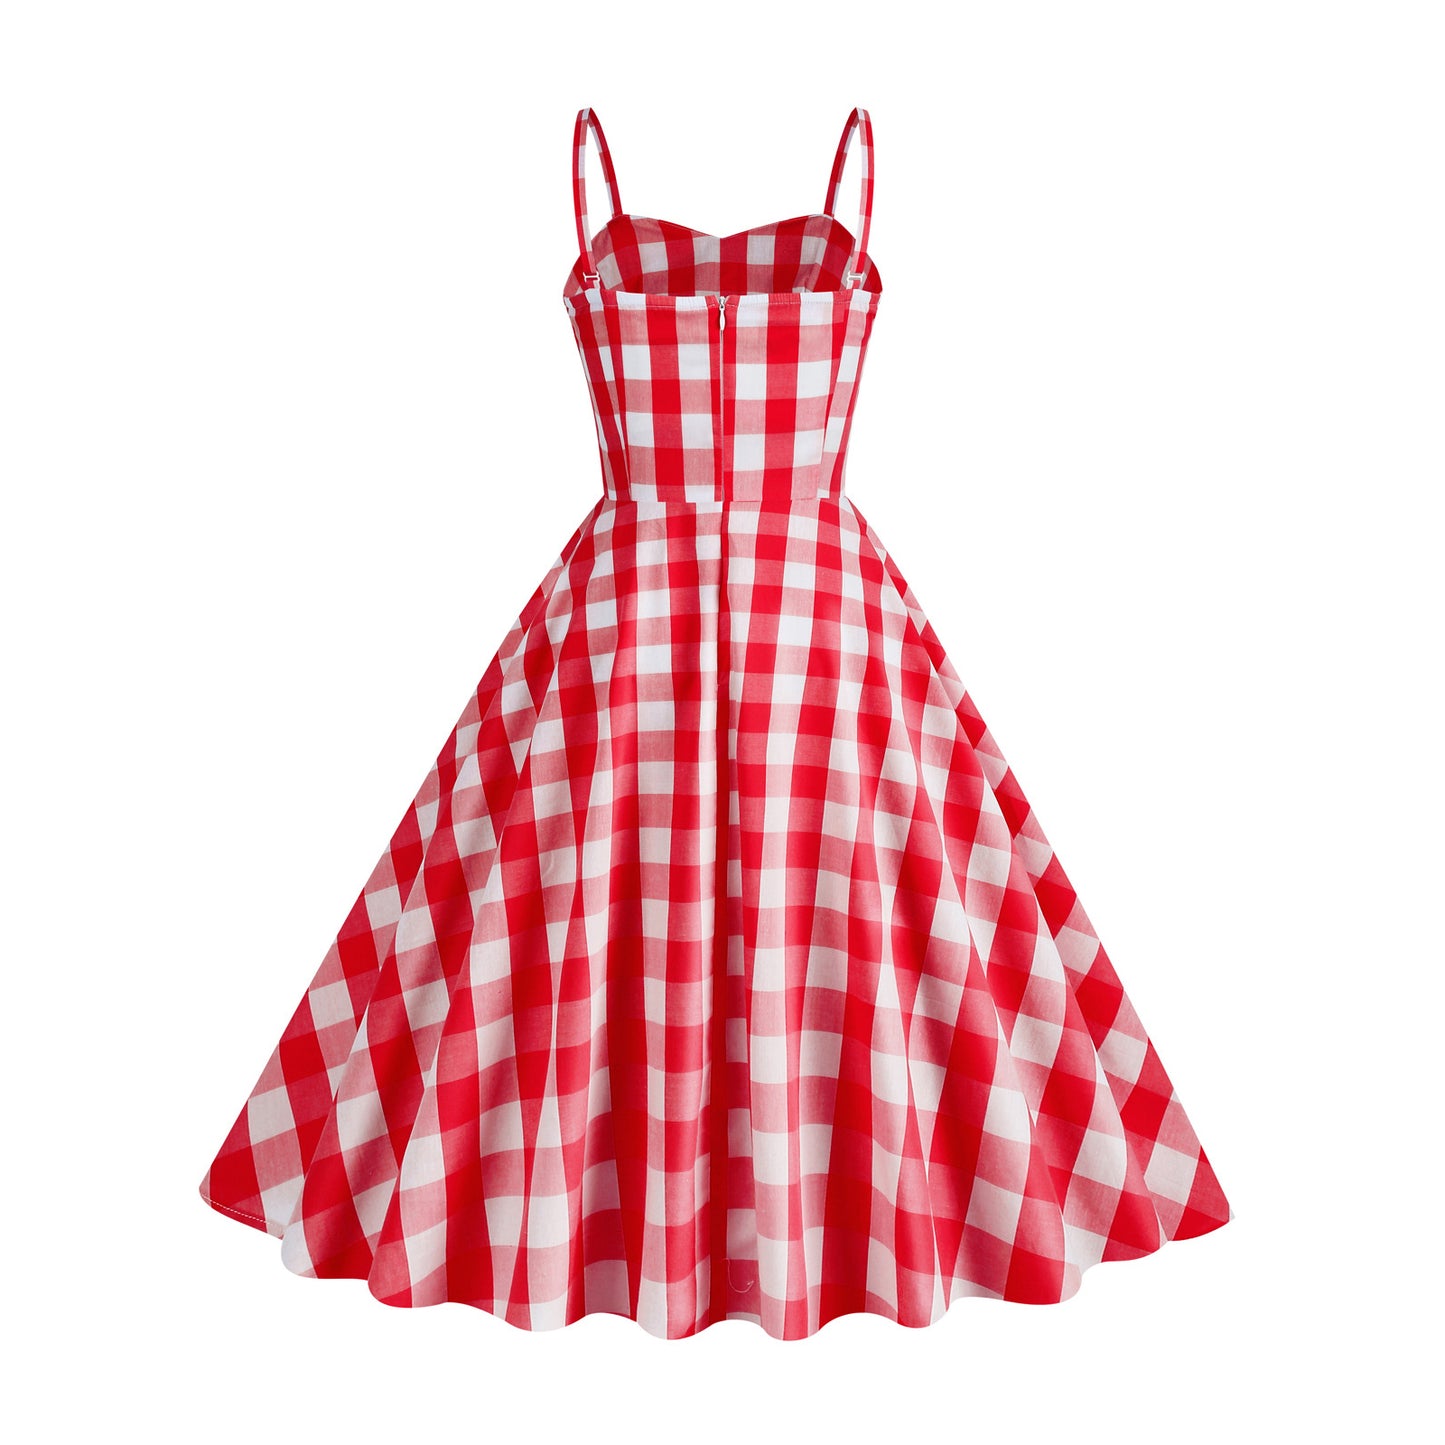 Gingham Barbiecore Outfit Margot Robbie Cosplay Costume Plaid A-line Midi Dress